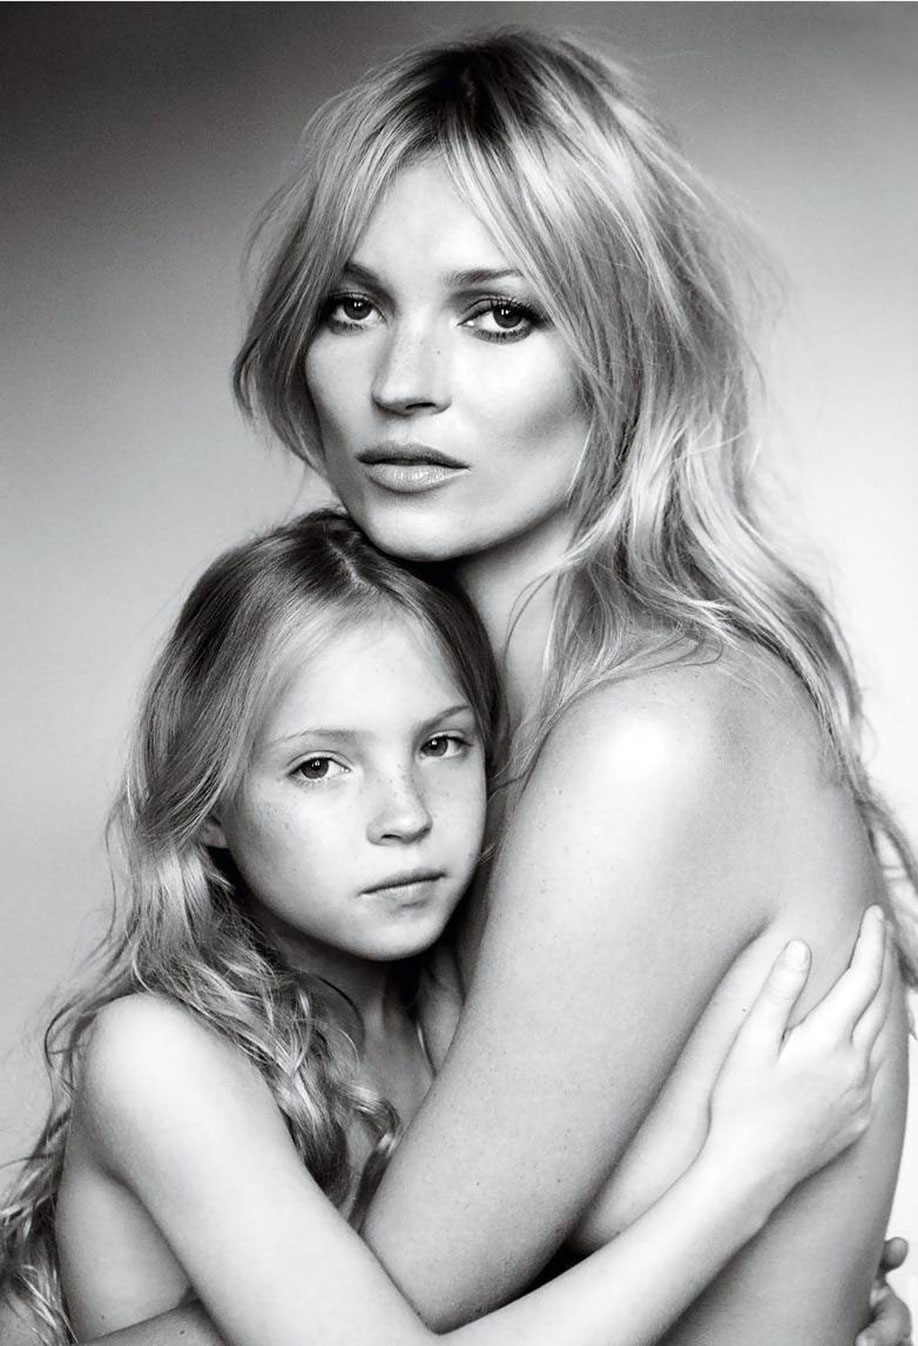 kate-moss-and-her-daughter-lila-grace-photographed-by-mario-testino-for-vogue-sept-2011.jpg